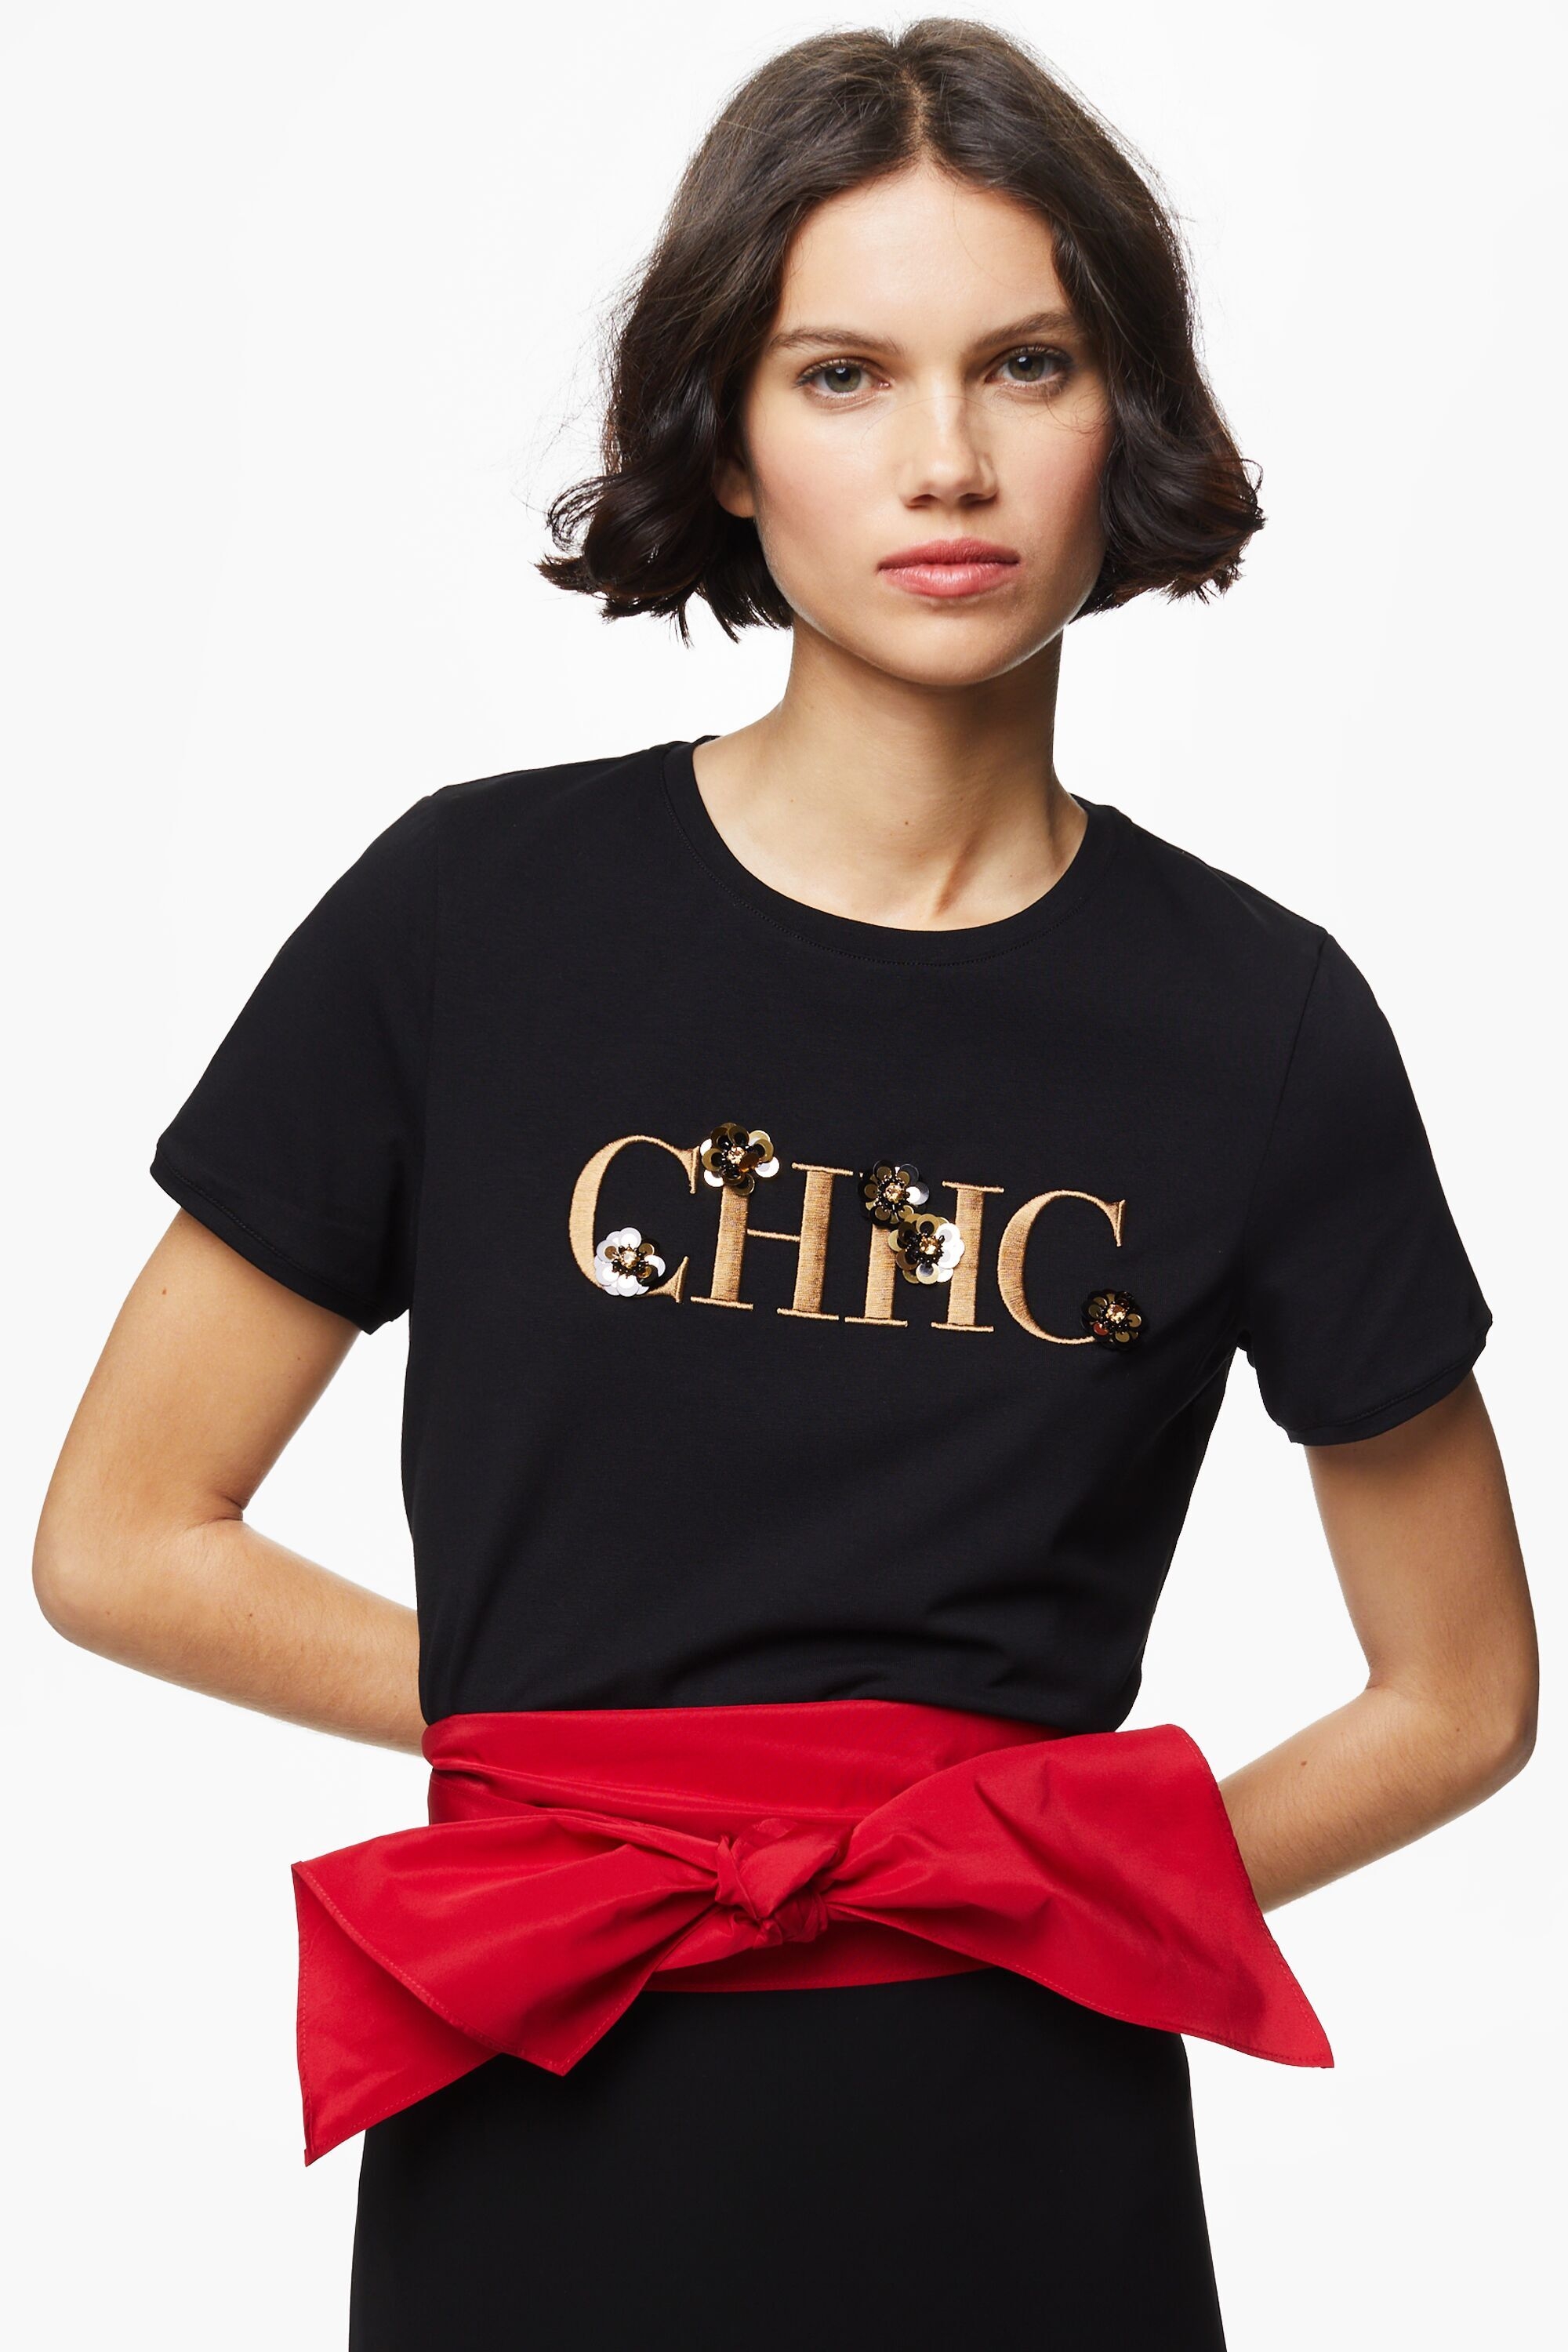 CH embroidered t-shirt with sequined flowers